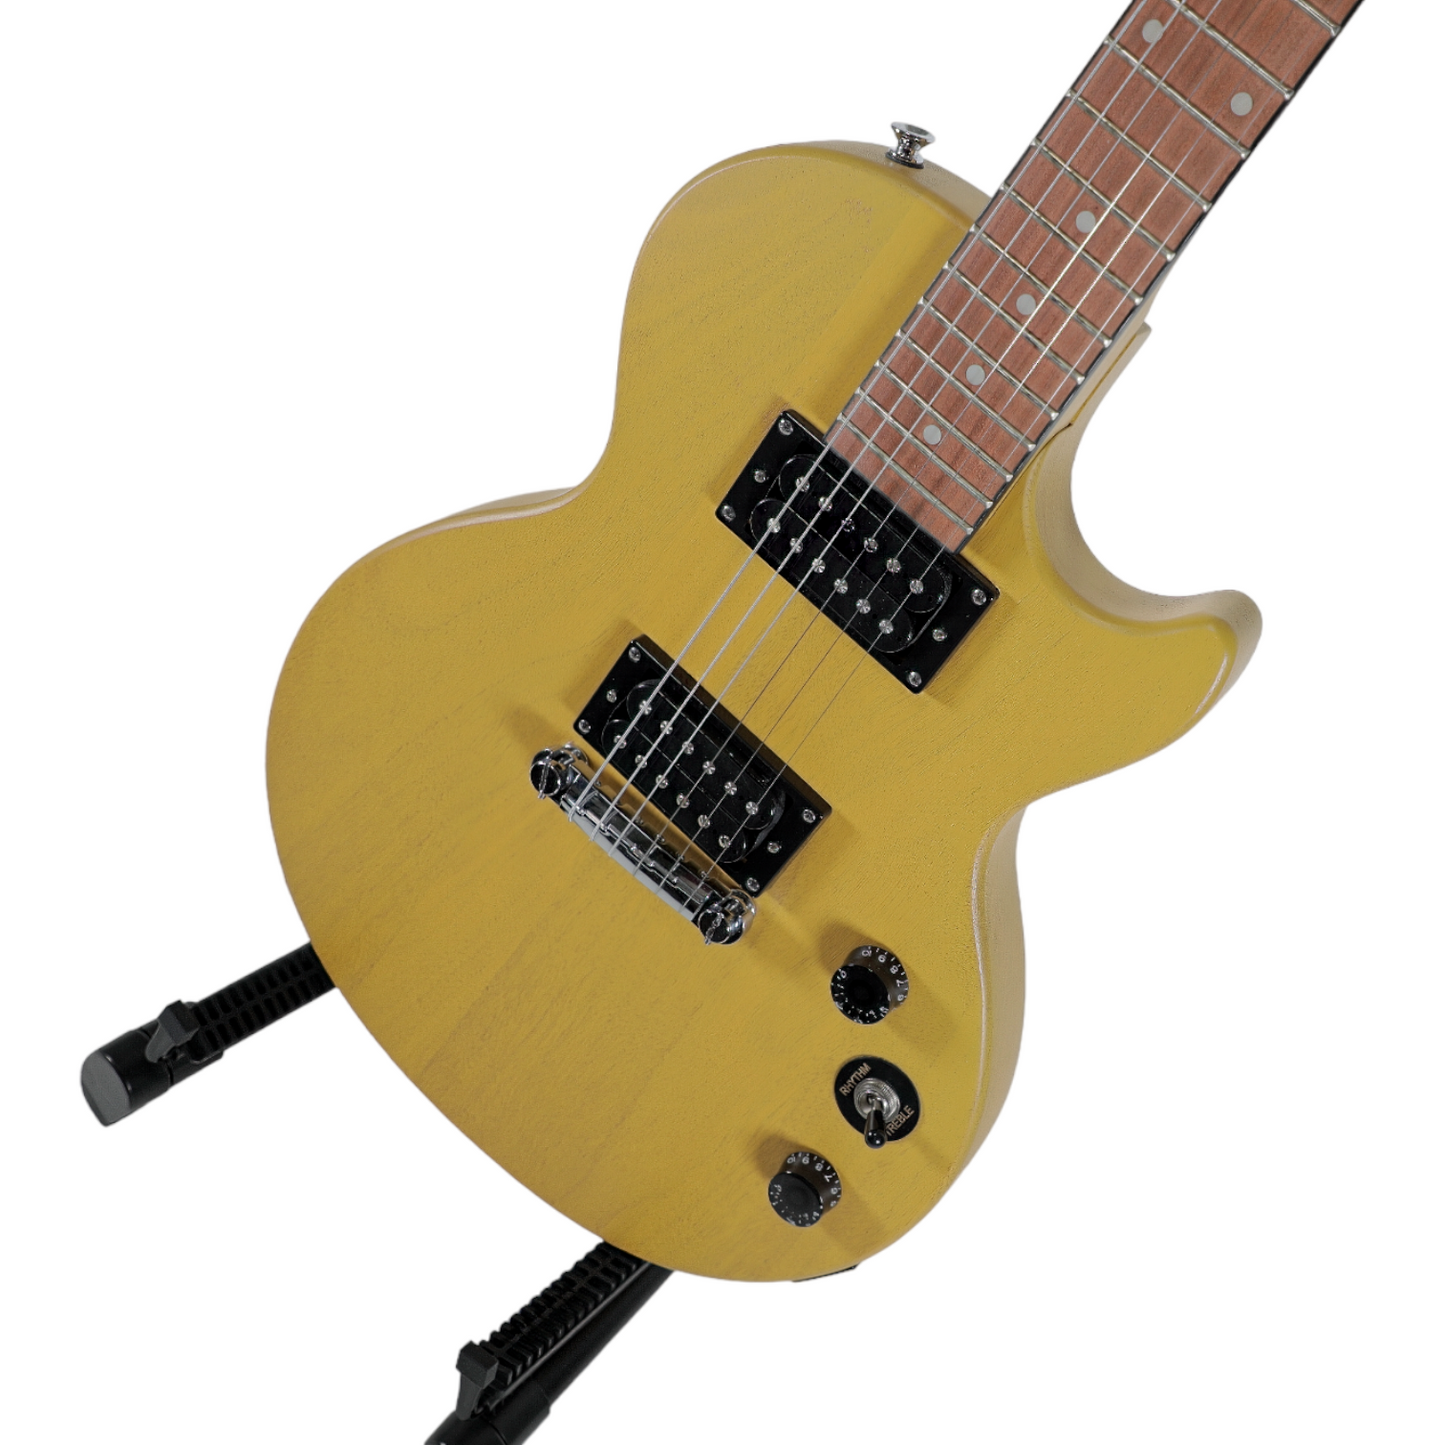 2019 Epiphone Les Paul Special - Faded TV Yellow